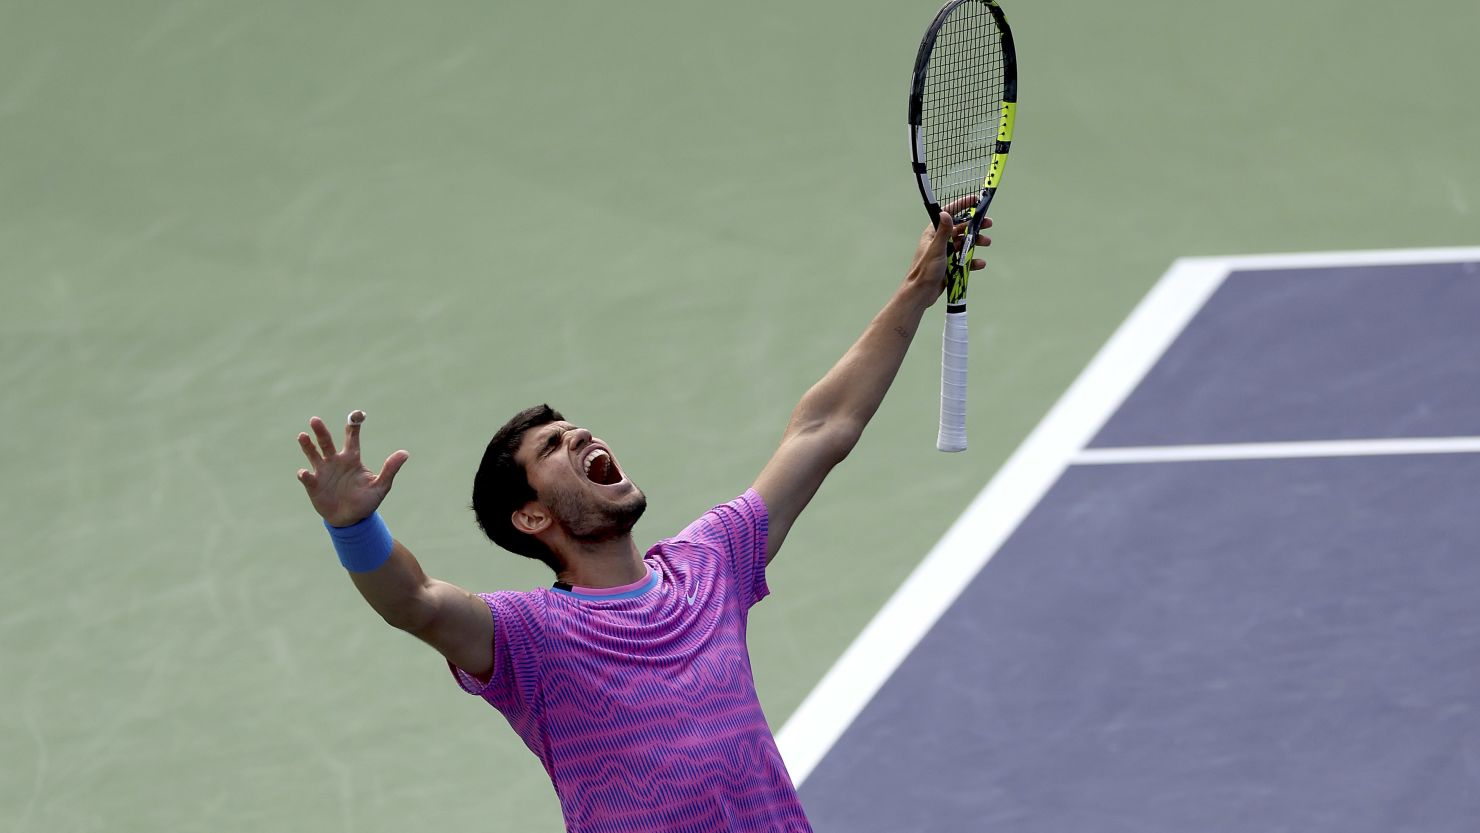 Alcaraz celebrates winning match point against Medvedev at Indian Wells in California.